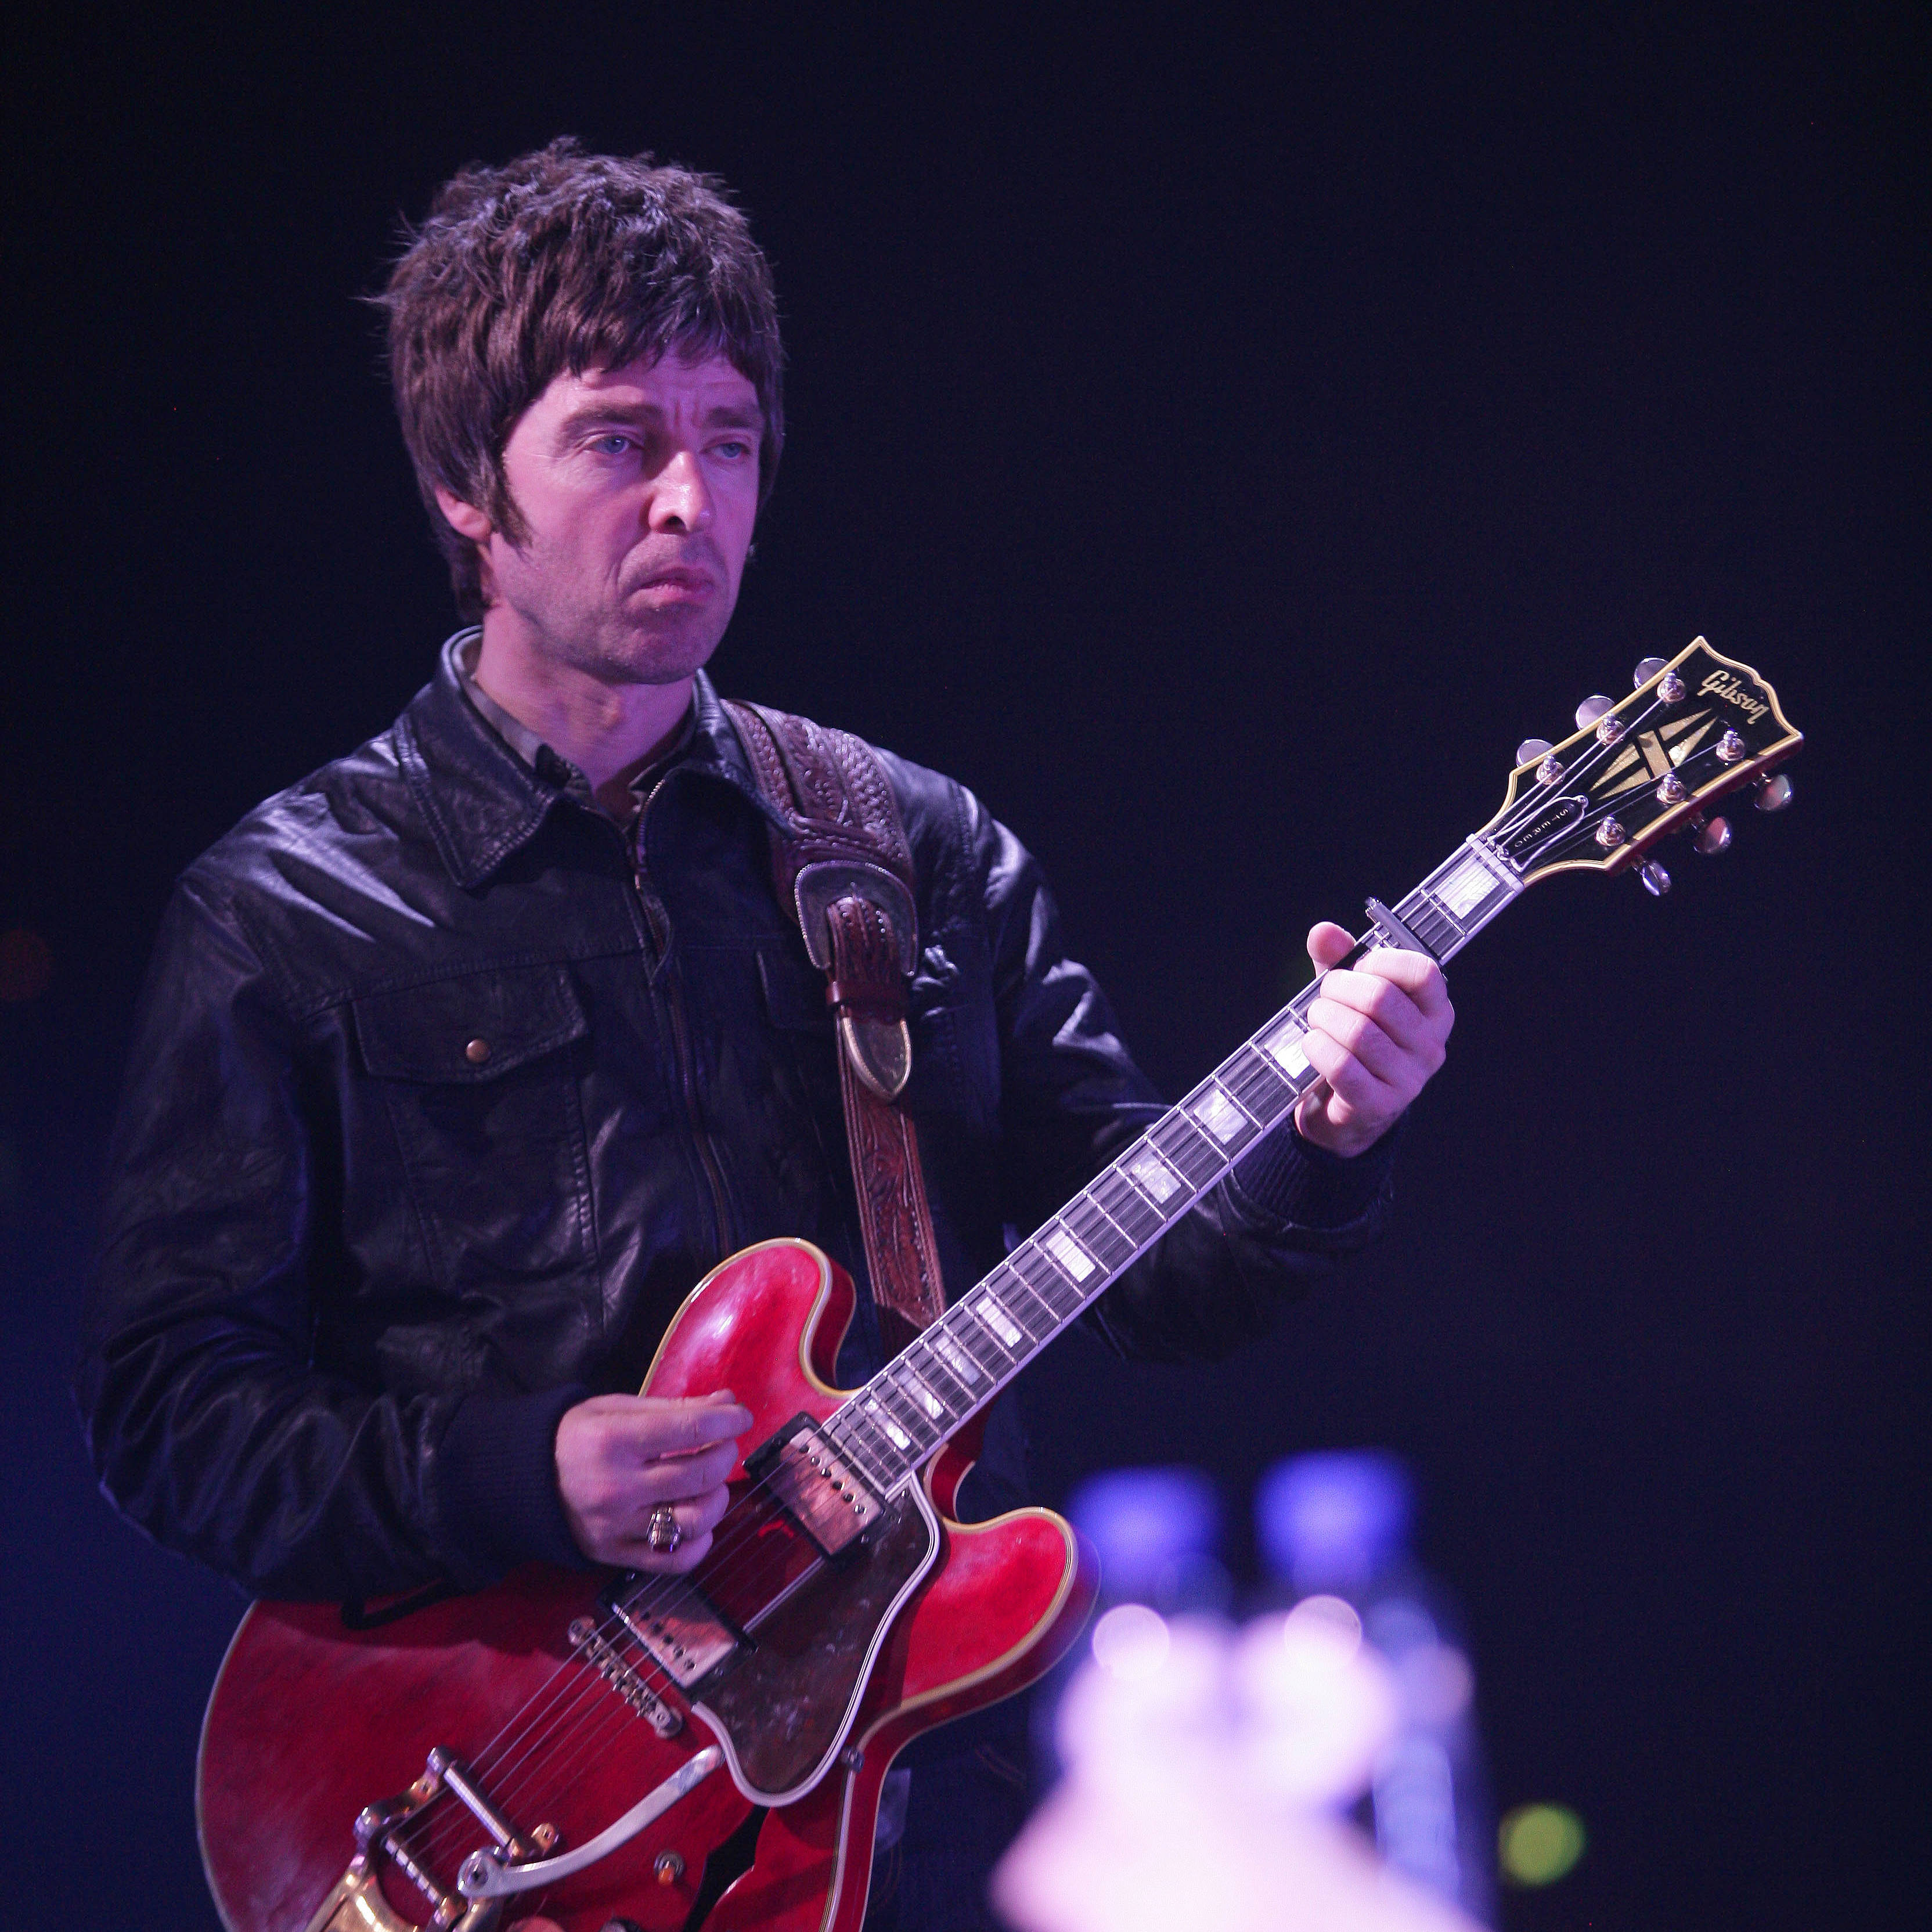 Noel Gallagher's at centre Oasis sells for £325,000 at auction - Radio X